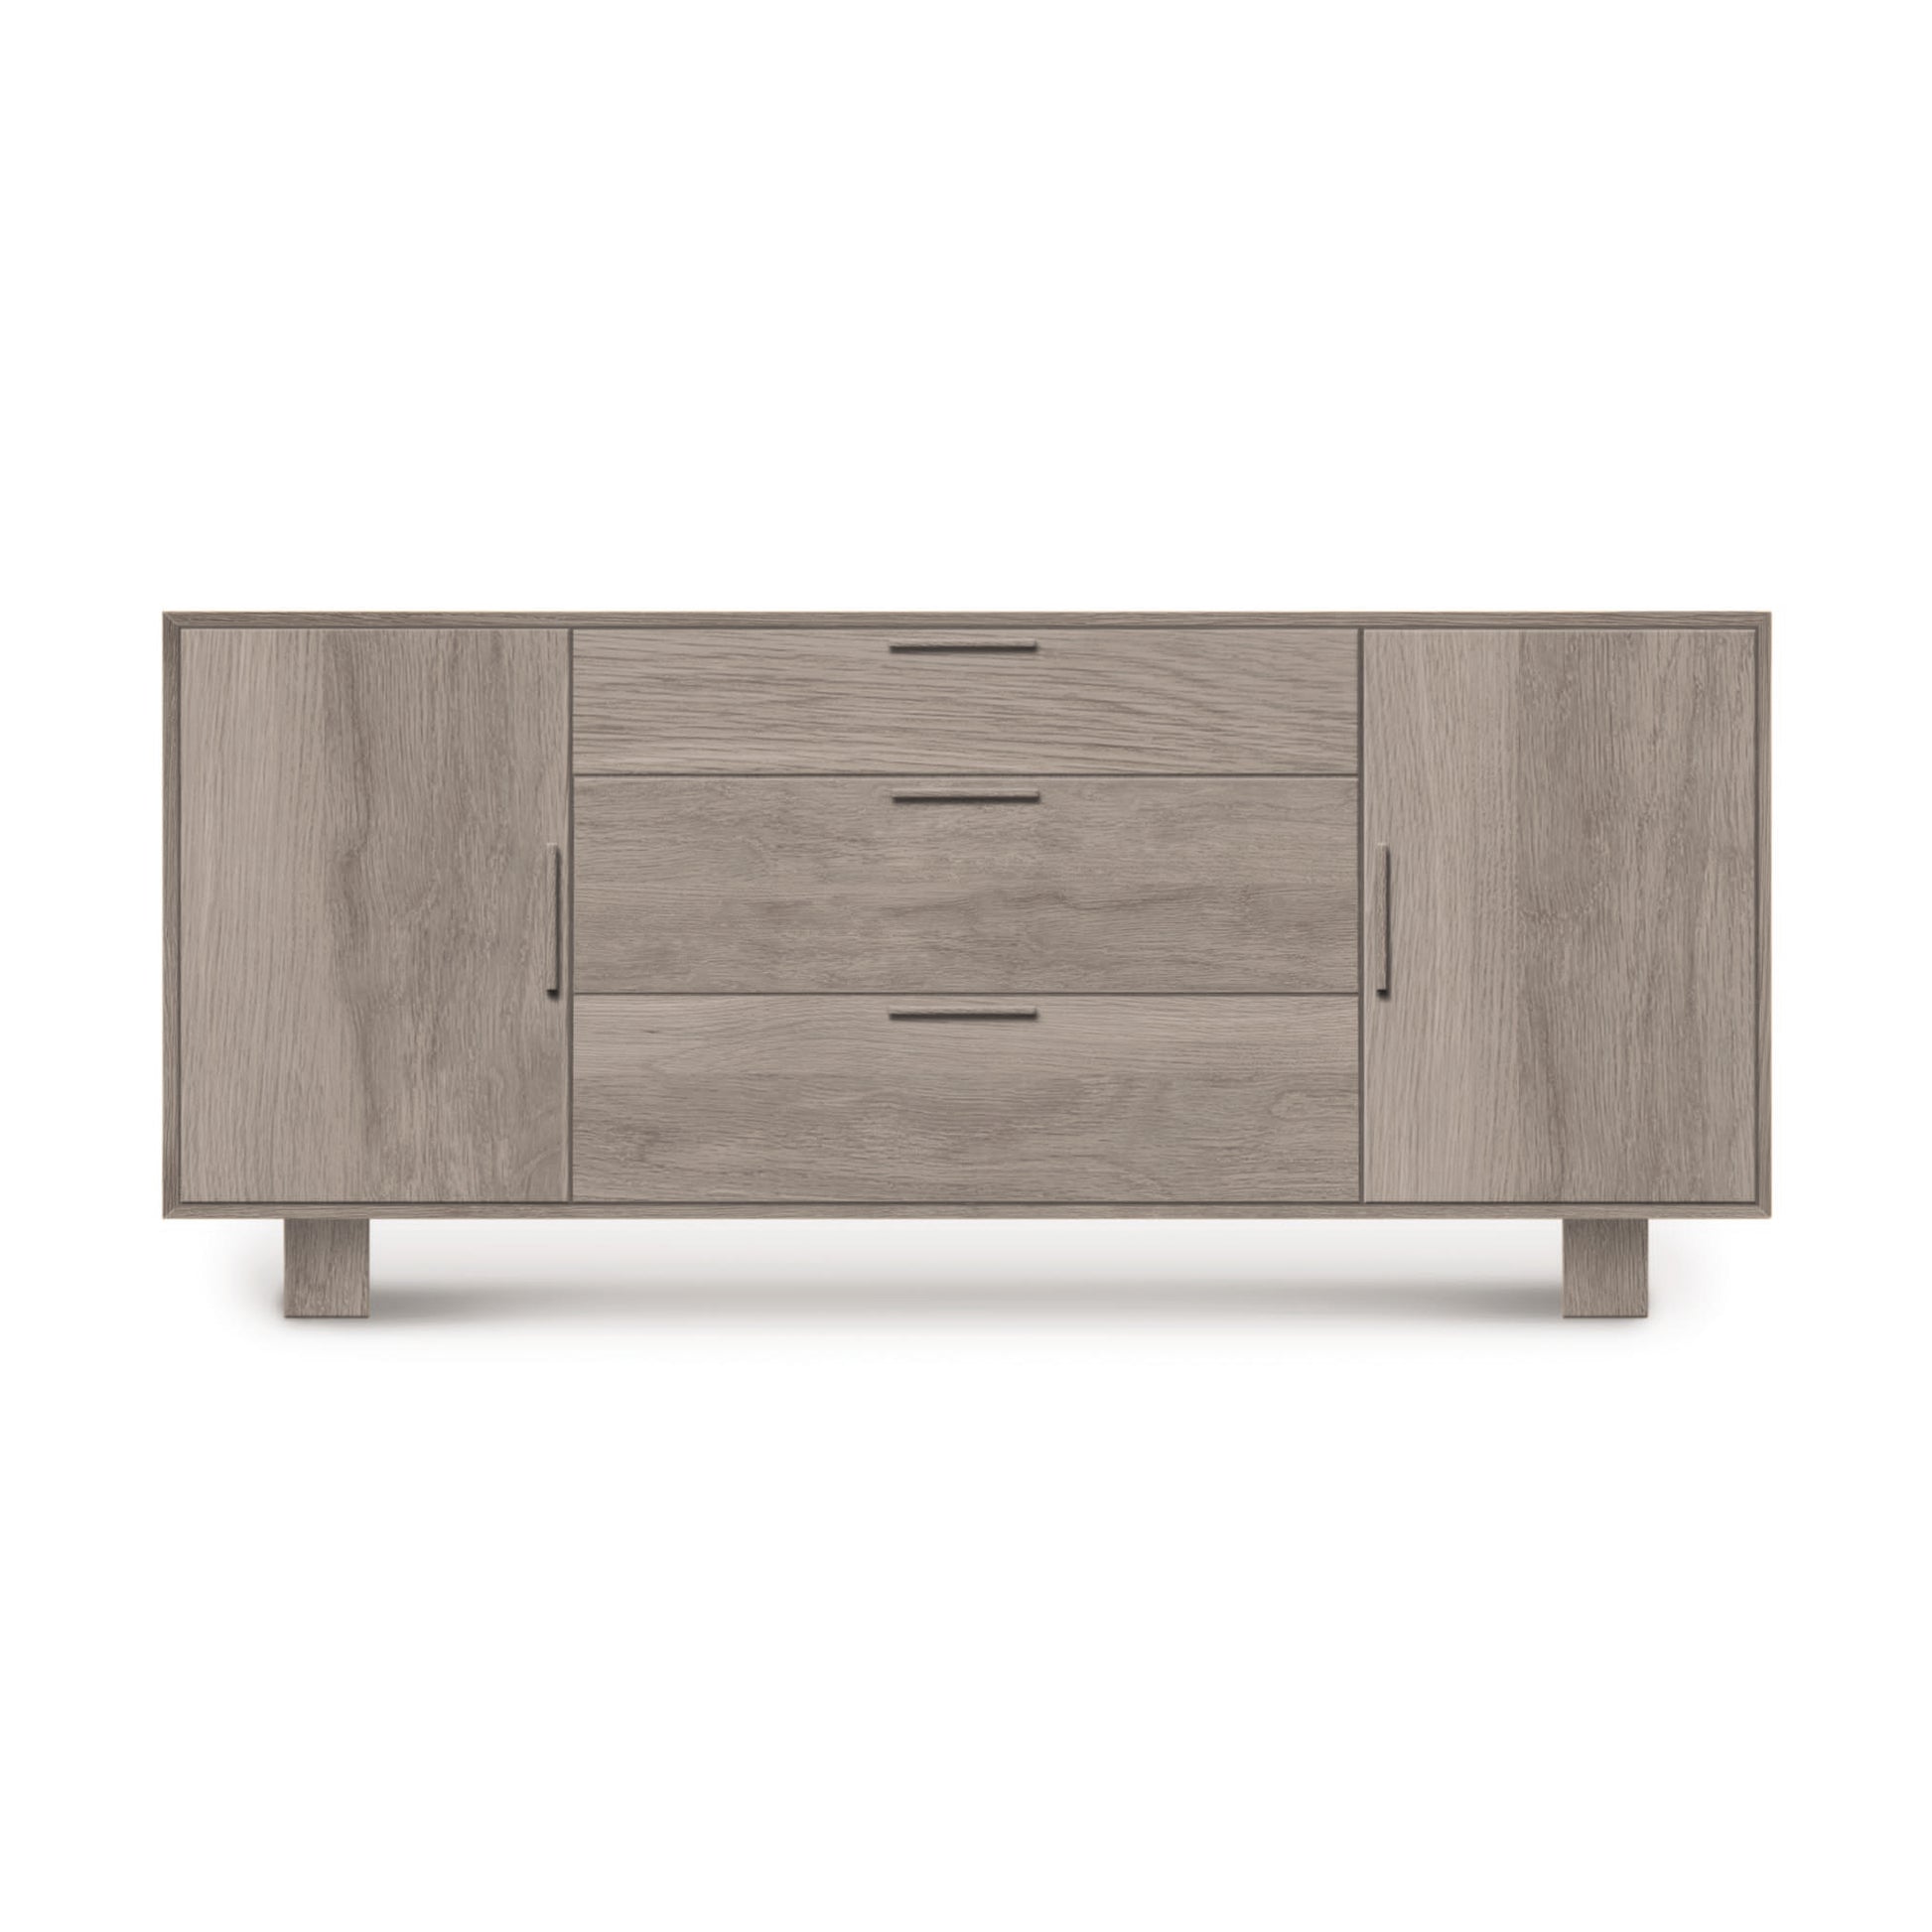 Modern Copeland Furniture Iso 2 Door, 3 Side Drawer Buffet, isolated on a white background.